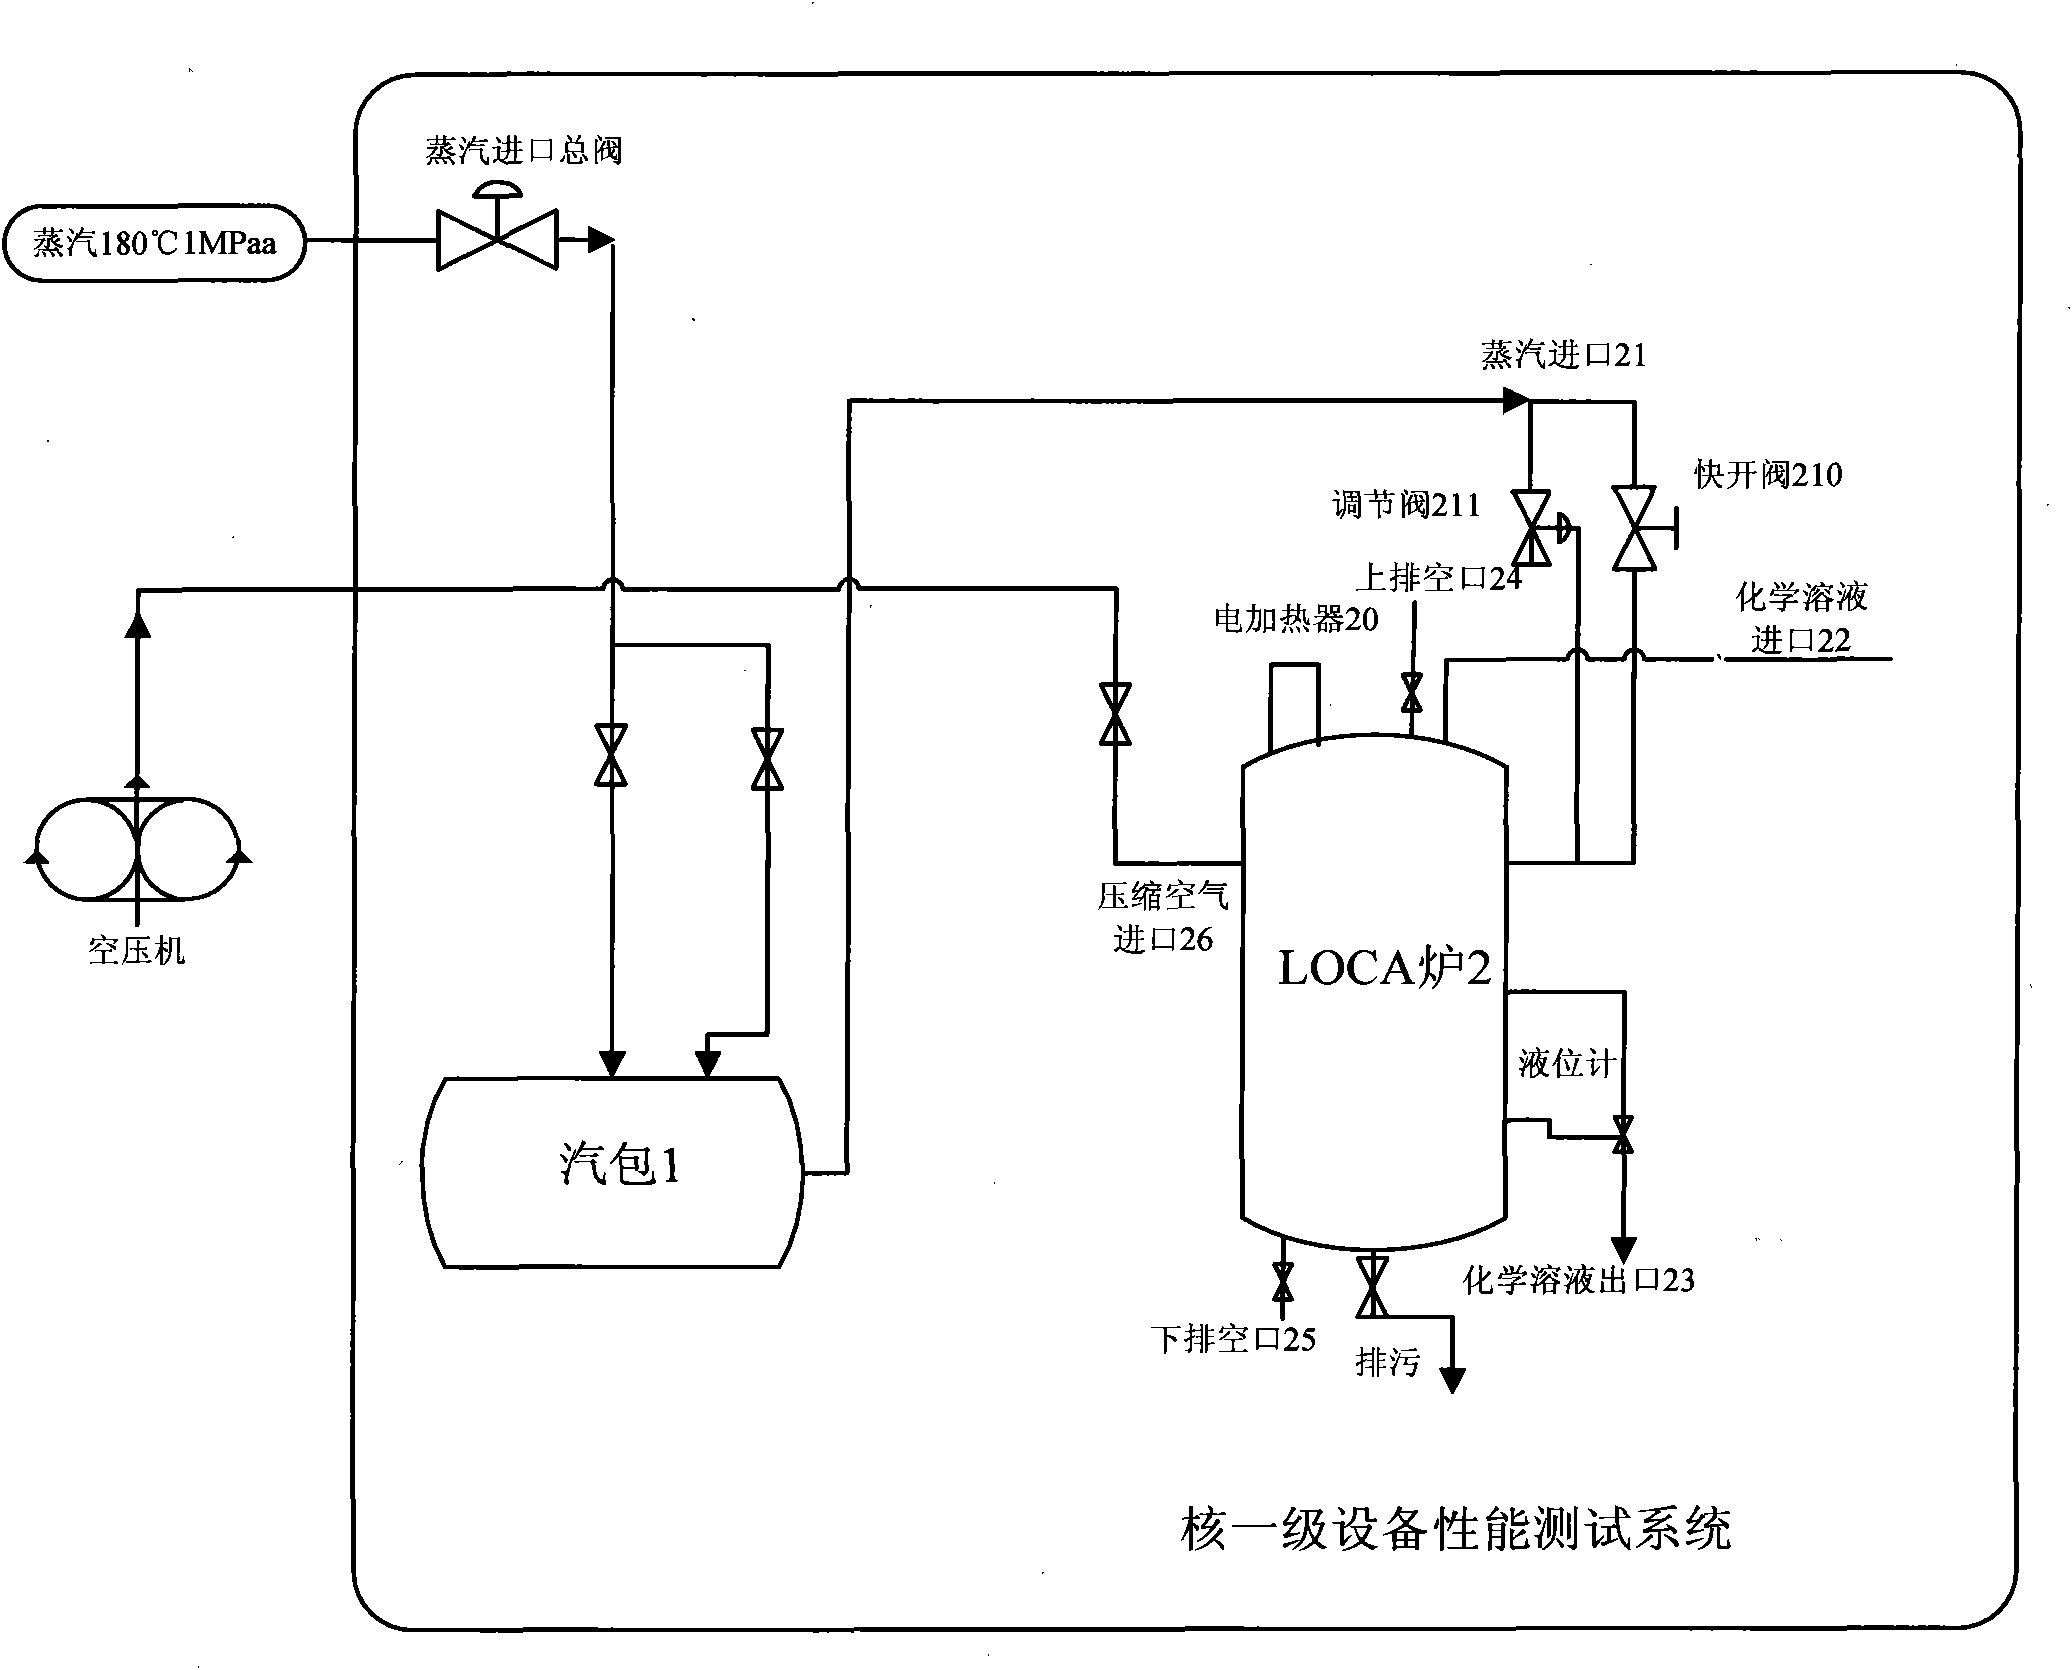 Nuclear class-1 equipment performance test system and method